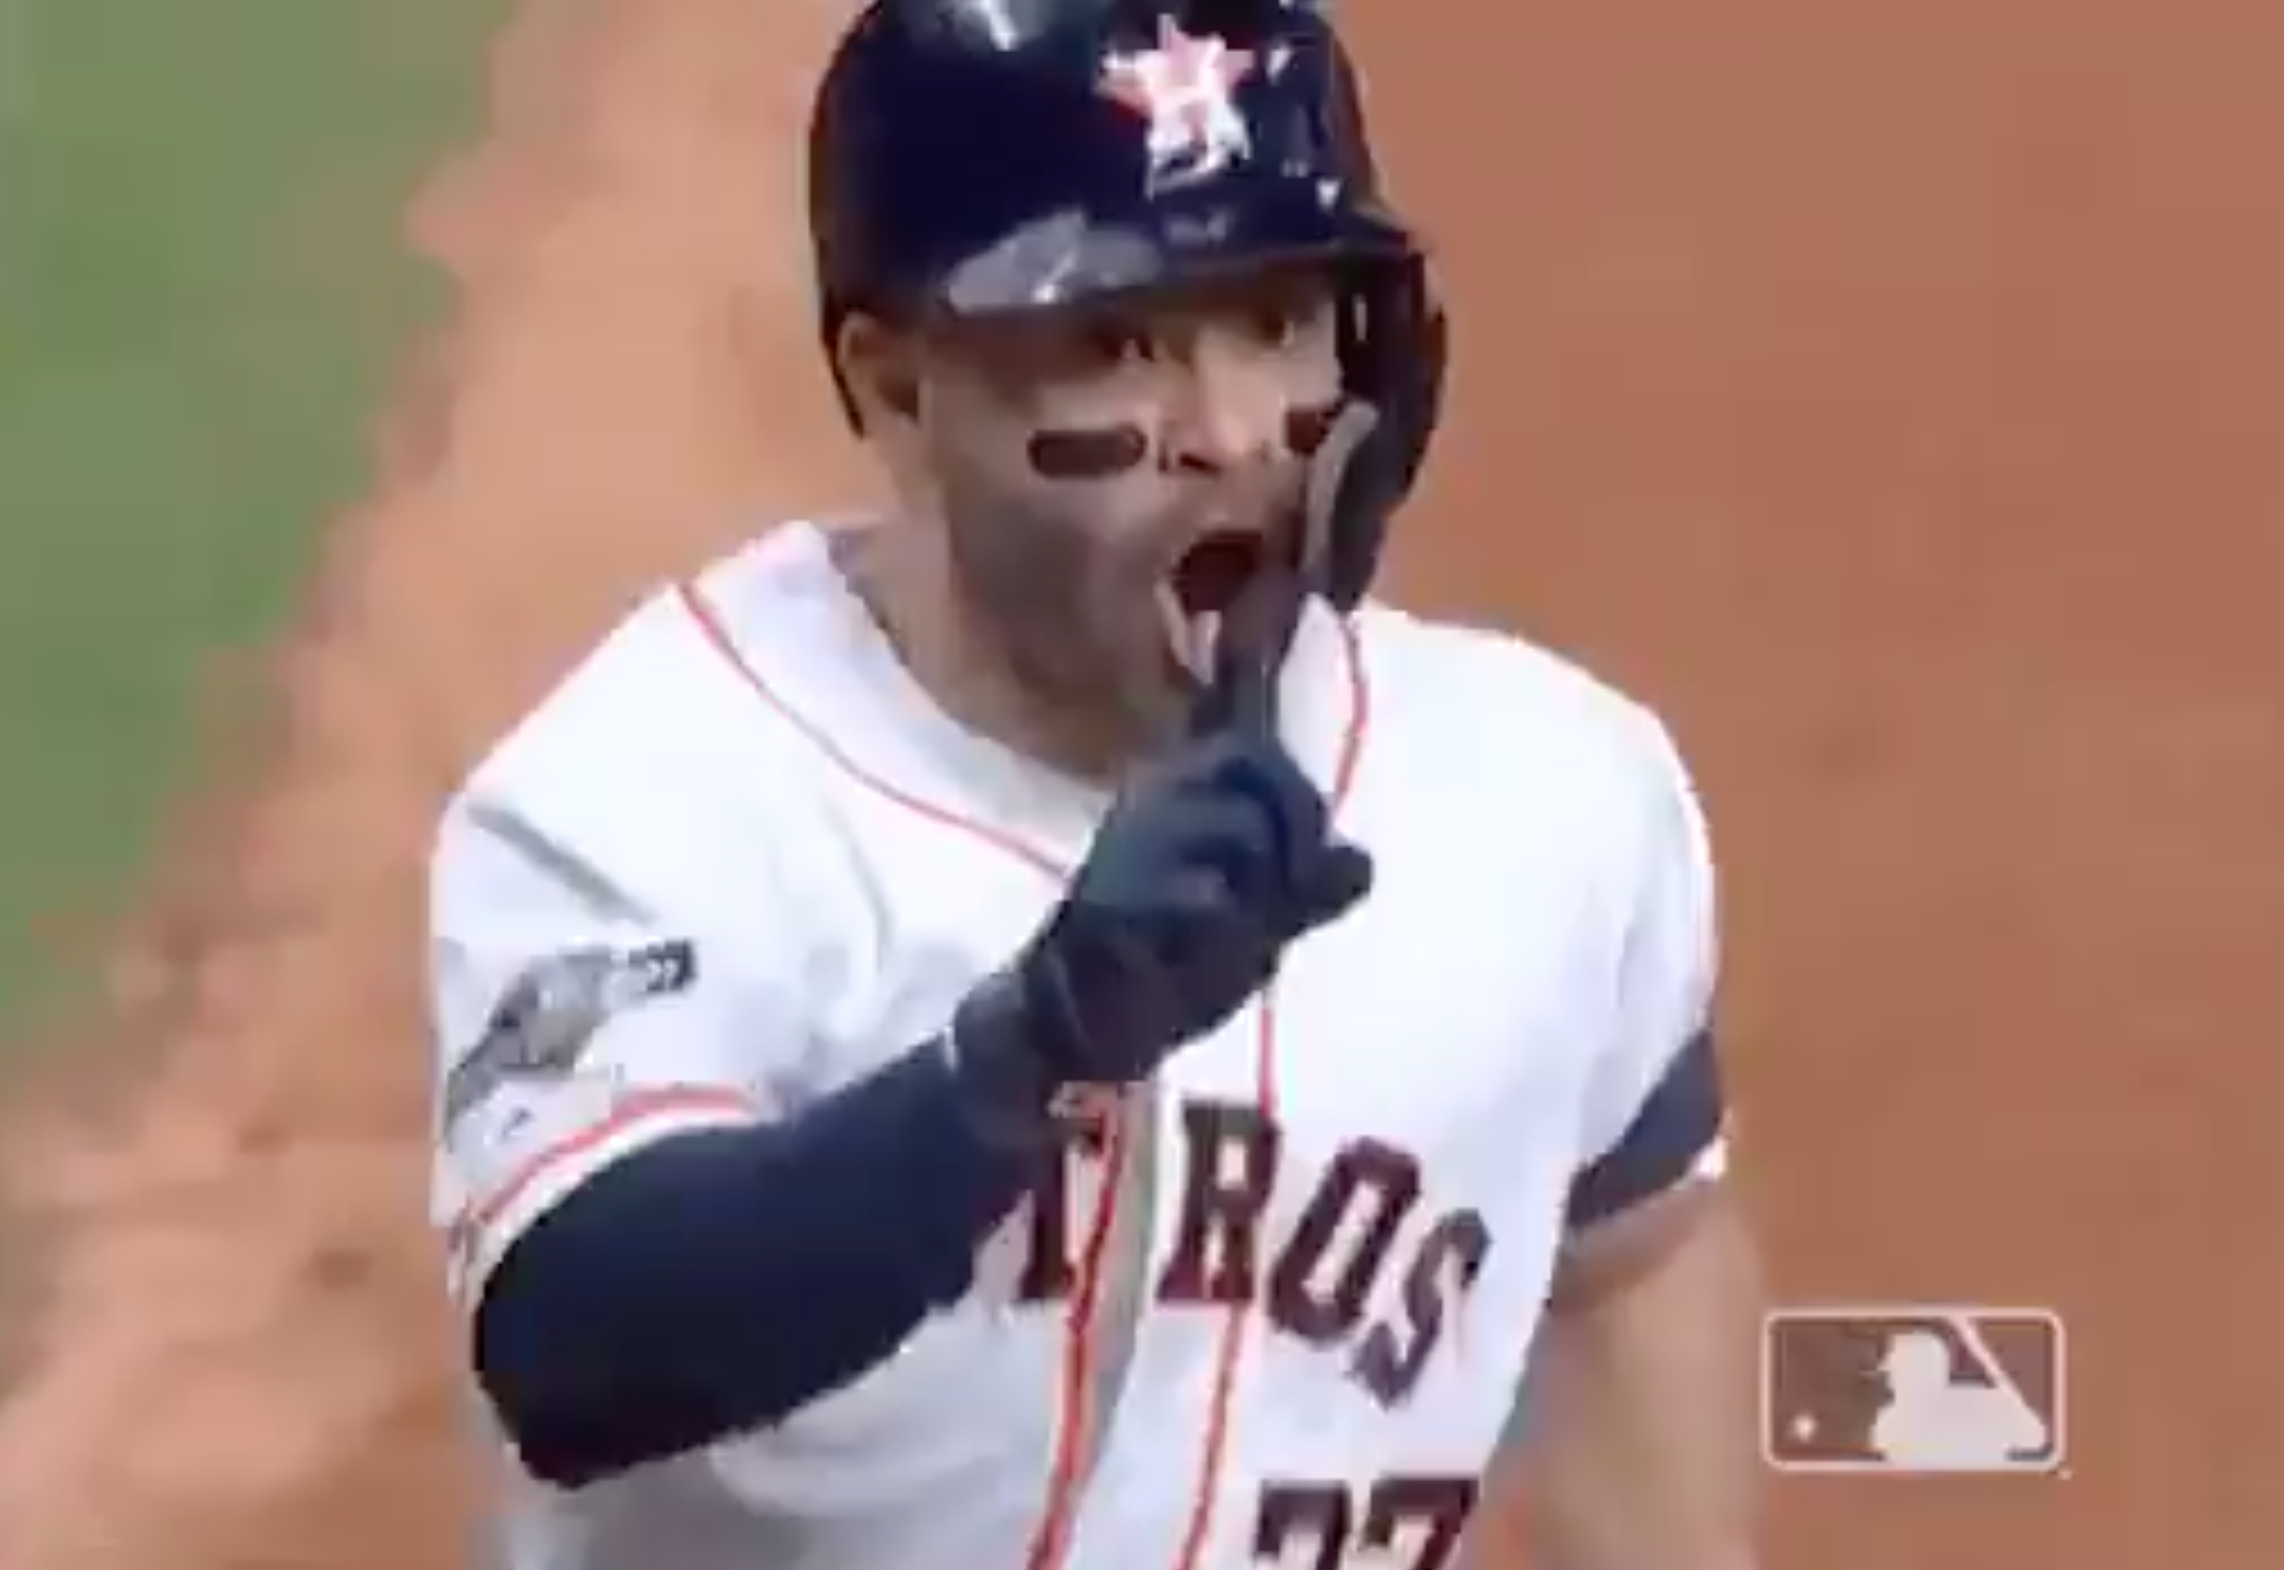 Why Jose Altuve did not want his Jersey removed. - The Crawfish Boxes